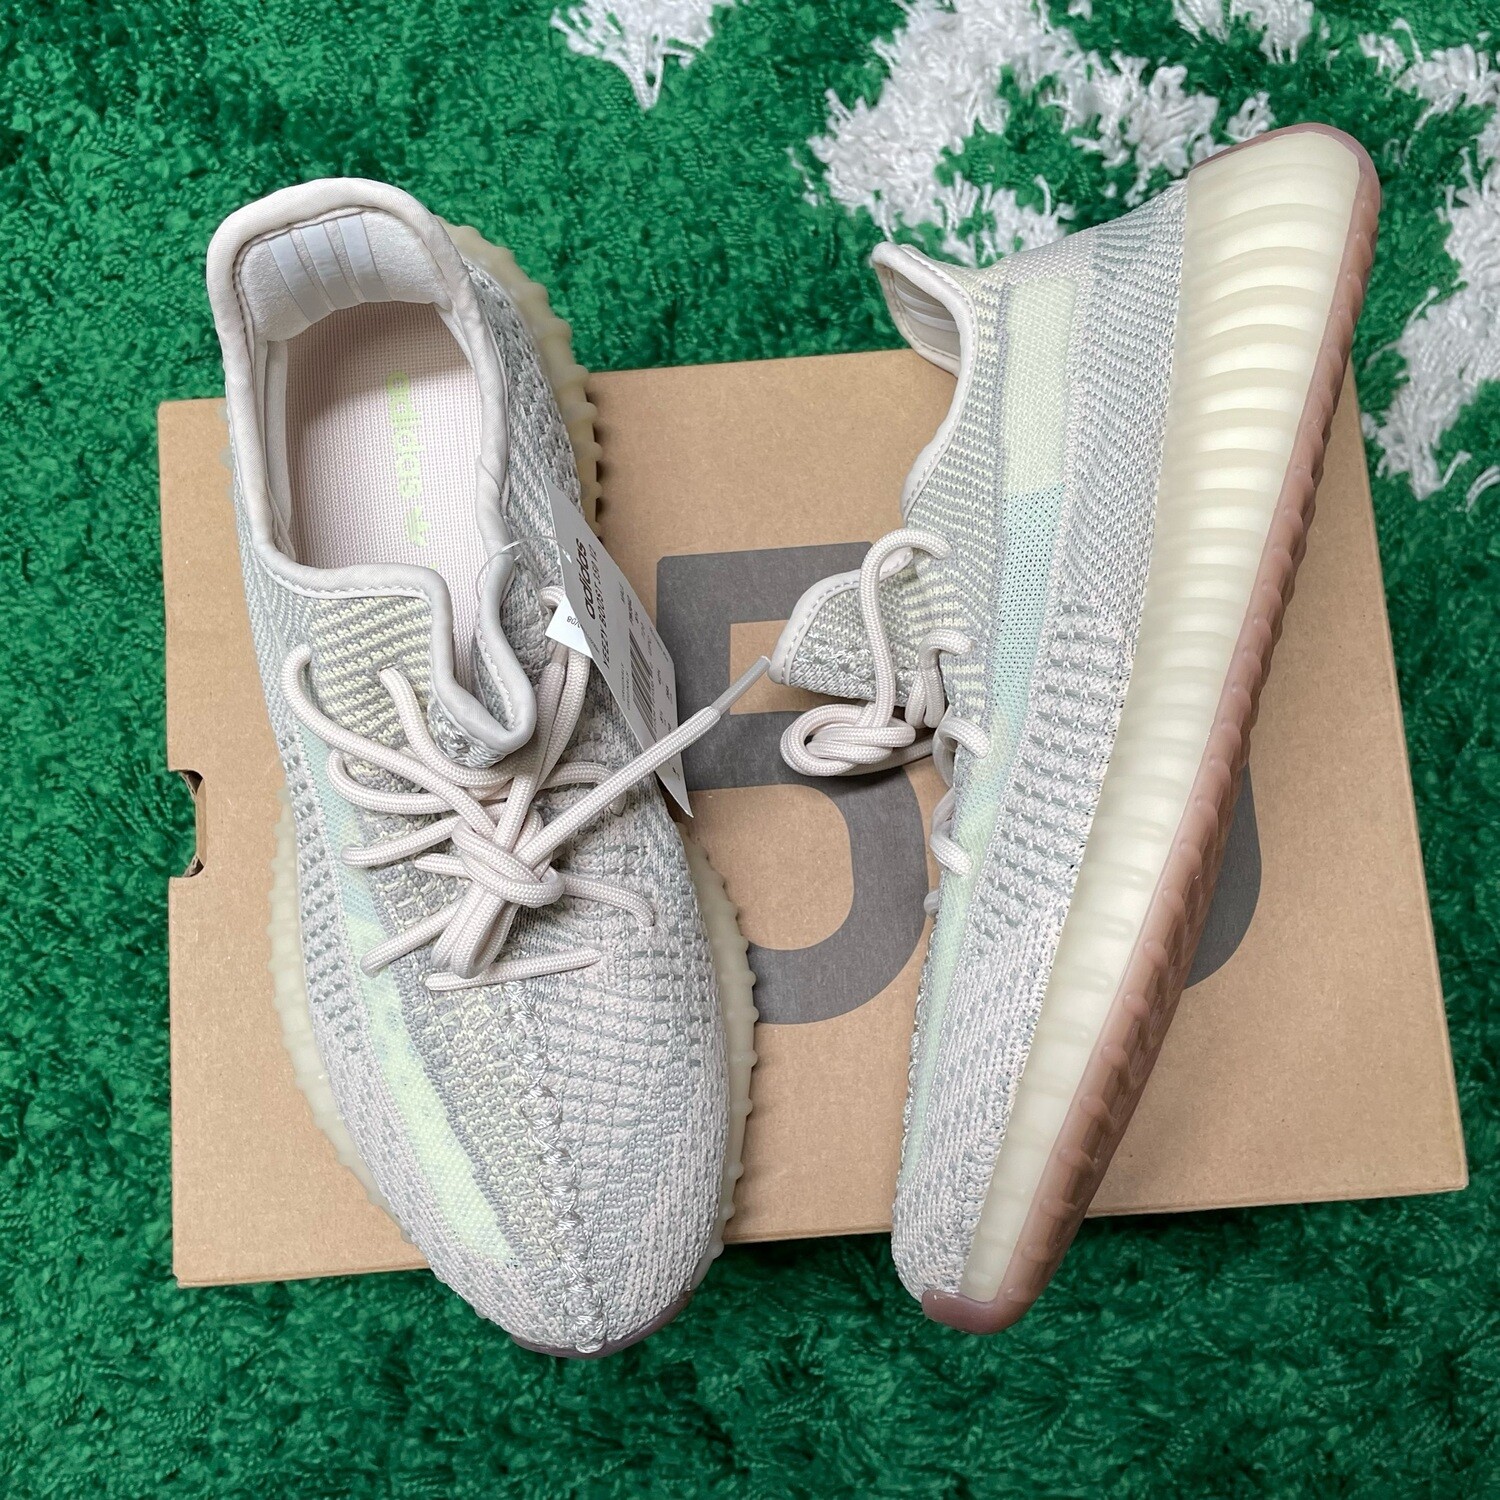 adidas Yeezy Boost 350 V2 Citrin (Non-Reflective) Size 9M/10.5W